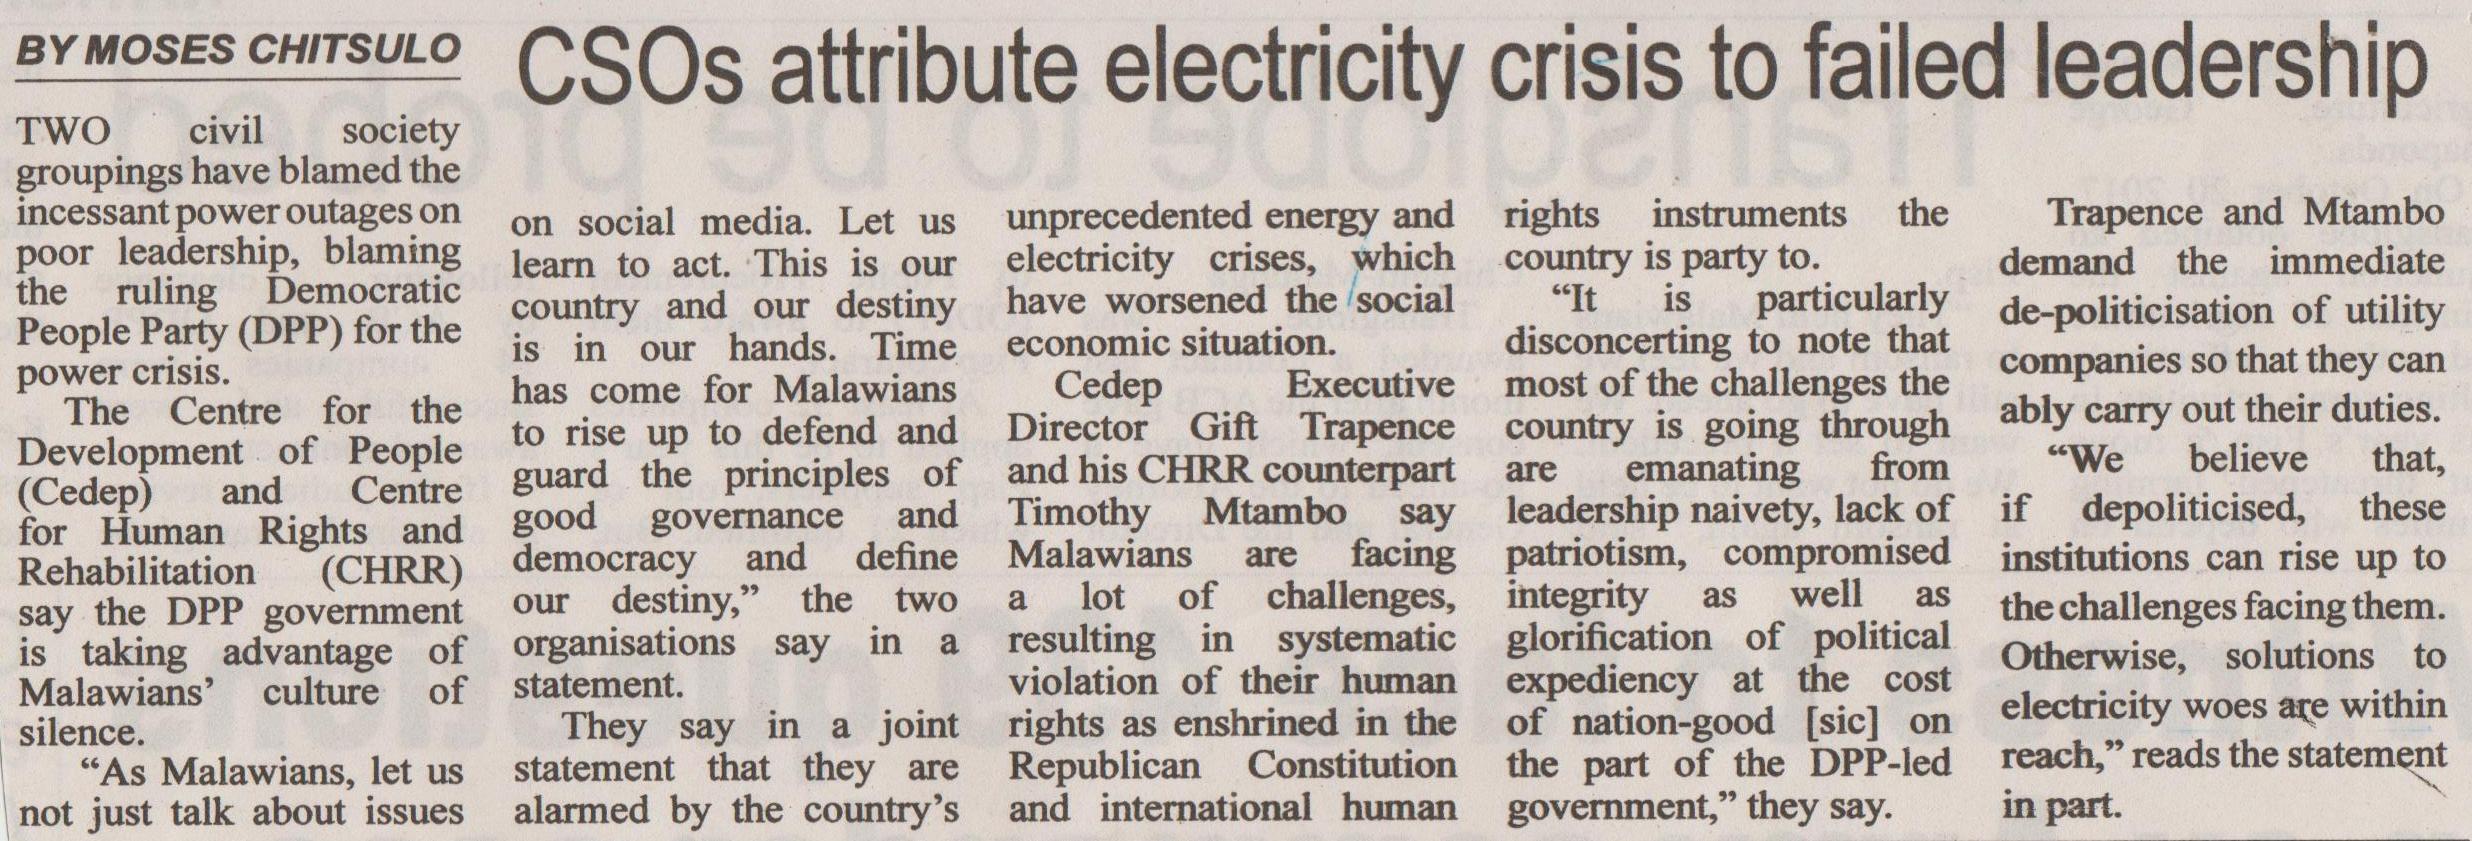 CSOs attribute electricity crisis to failed leadership_November 7, 2017_The Daily Times.JPG